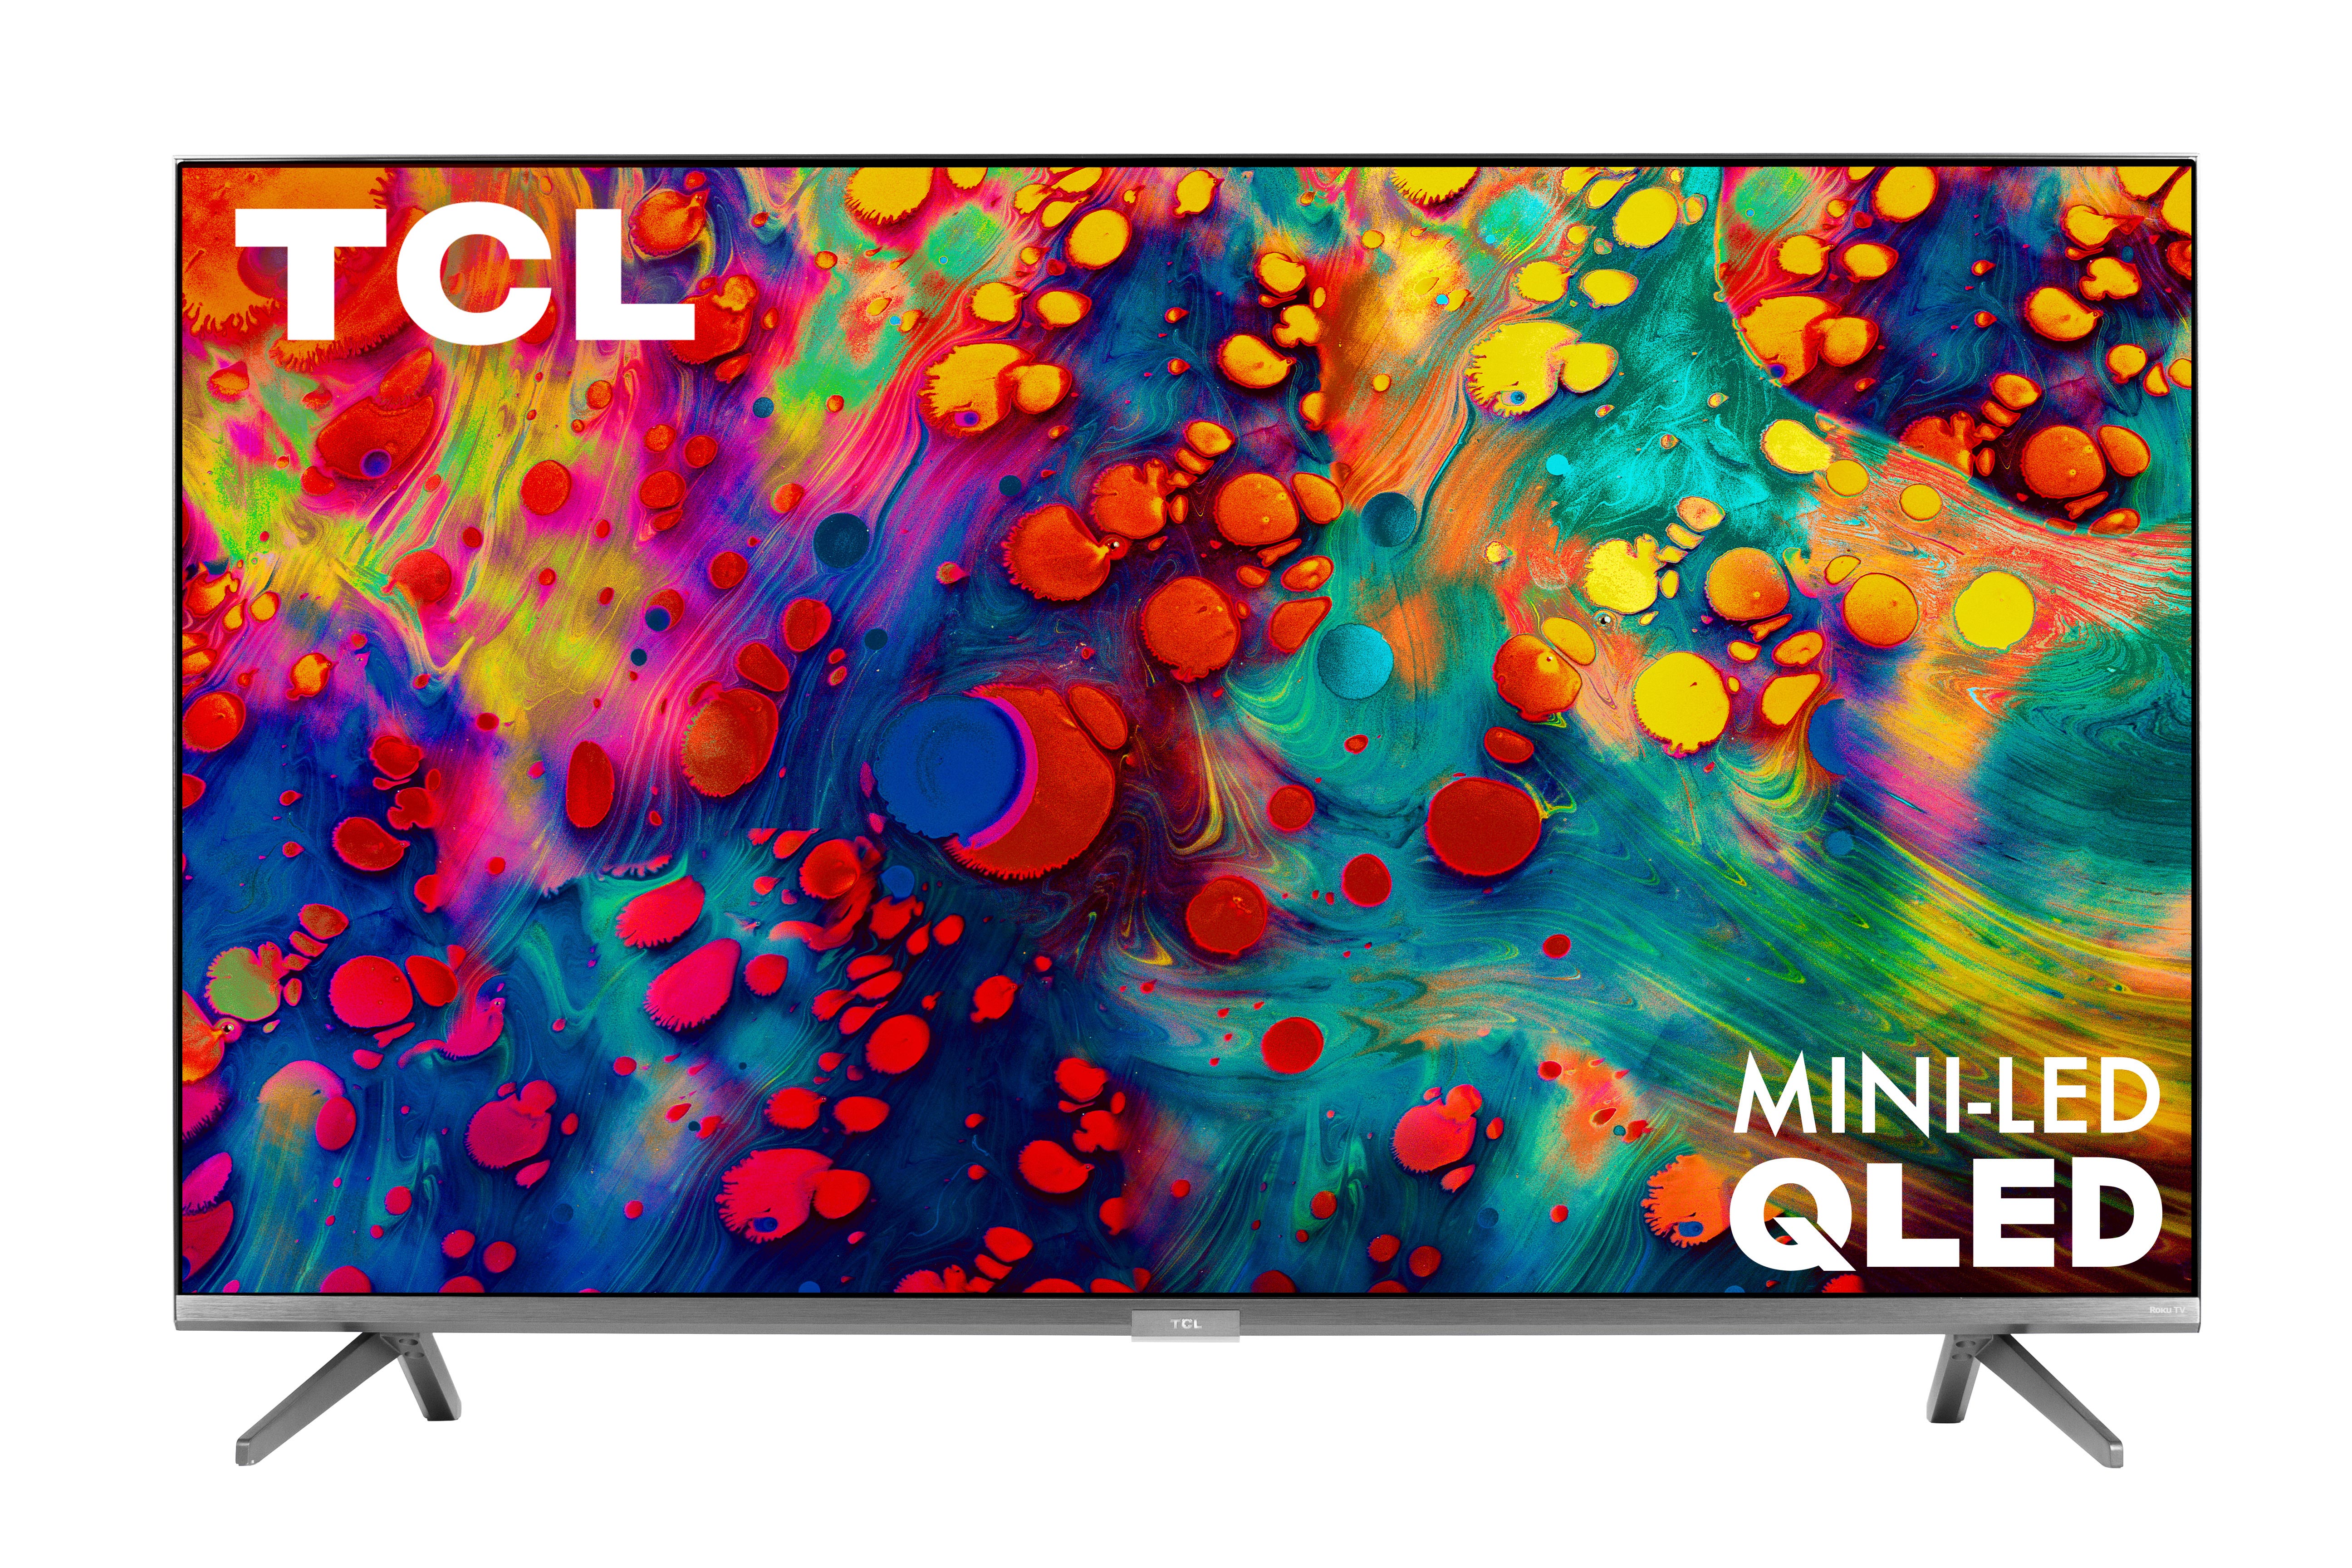 TCL 55" Class 6-Series 4K UHD Dolby Vision HDR QLED Roku Smart TV - 55R635 - image 1 of 16